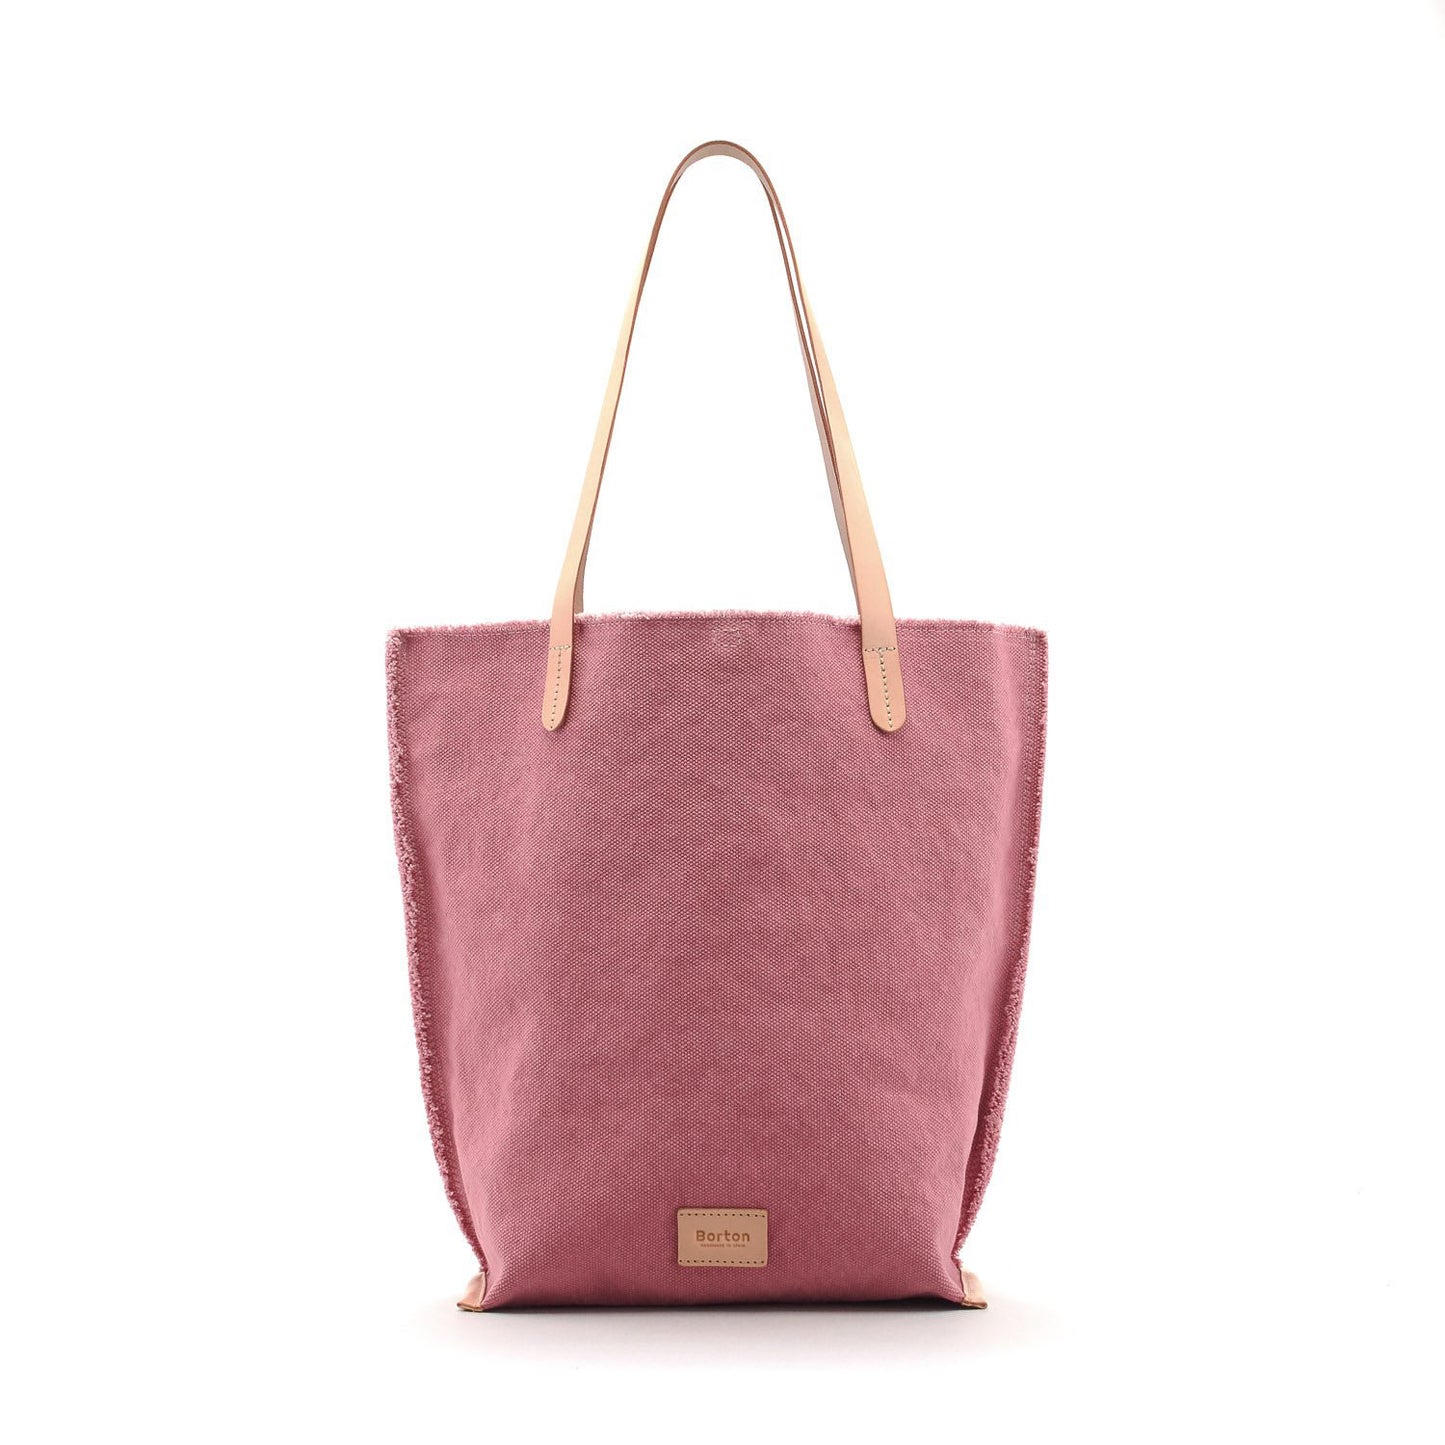 Mery Tote Bag Pink Canvas & Natural Leather